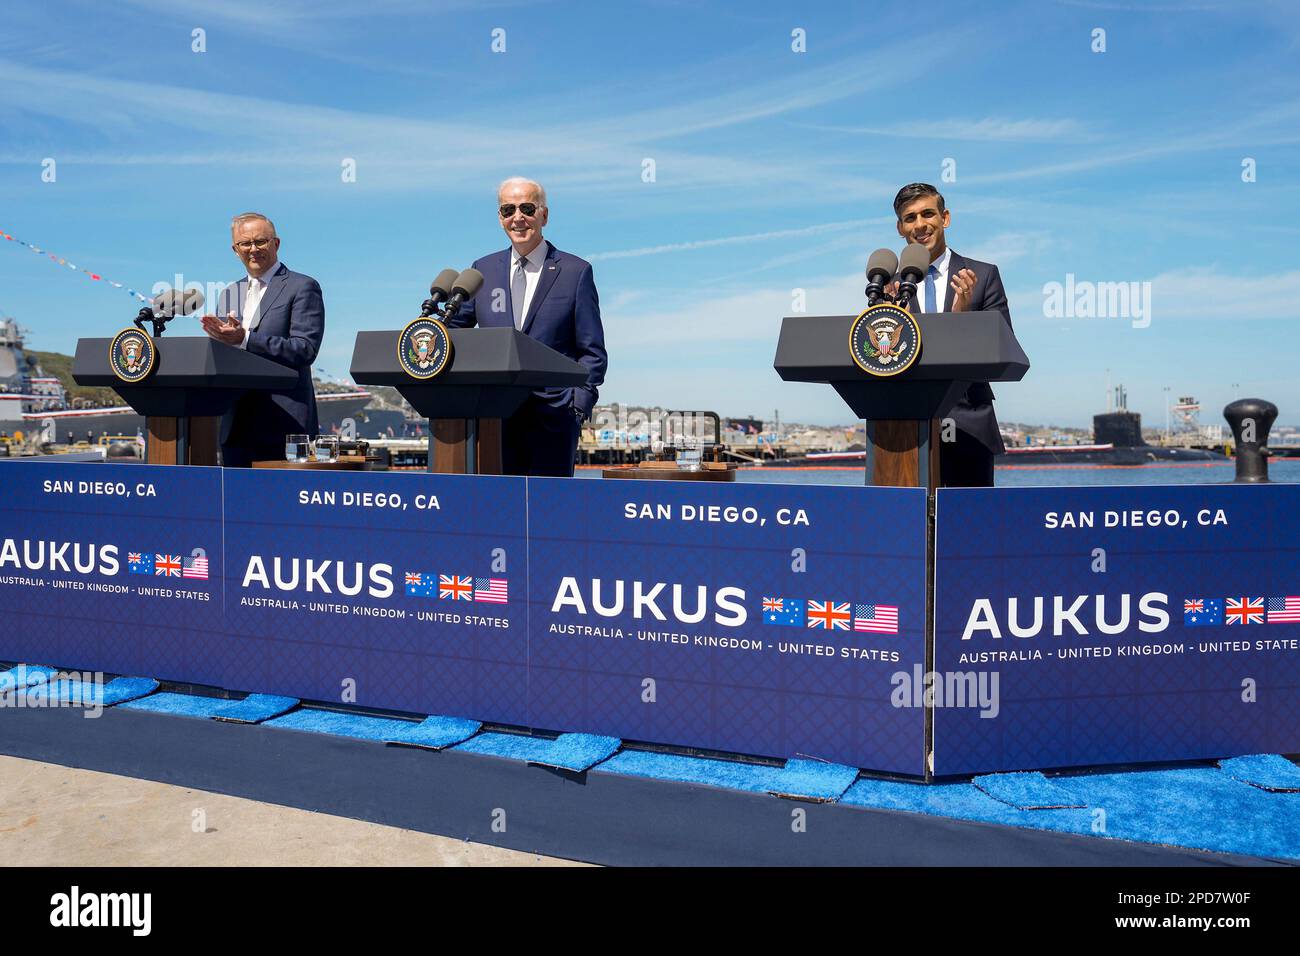 San Diego, United States of America. 13 March, 2023. U.S President Joe Biden, center, responds to a question during a press conference with Australian Prime Minister Anthony Albanese, left, and British Prime Minister Rishi Sunak following at Point Loma naval base, March 13, 2023 in San Diego, California. The three leaders of the AUKUS security pact agreed on expanding their nuclear-powered submarine fleet. Credit: Adam Schultz/White House Photo/Alamy Live News Stock Photo